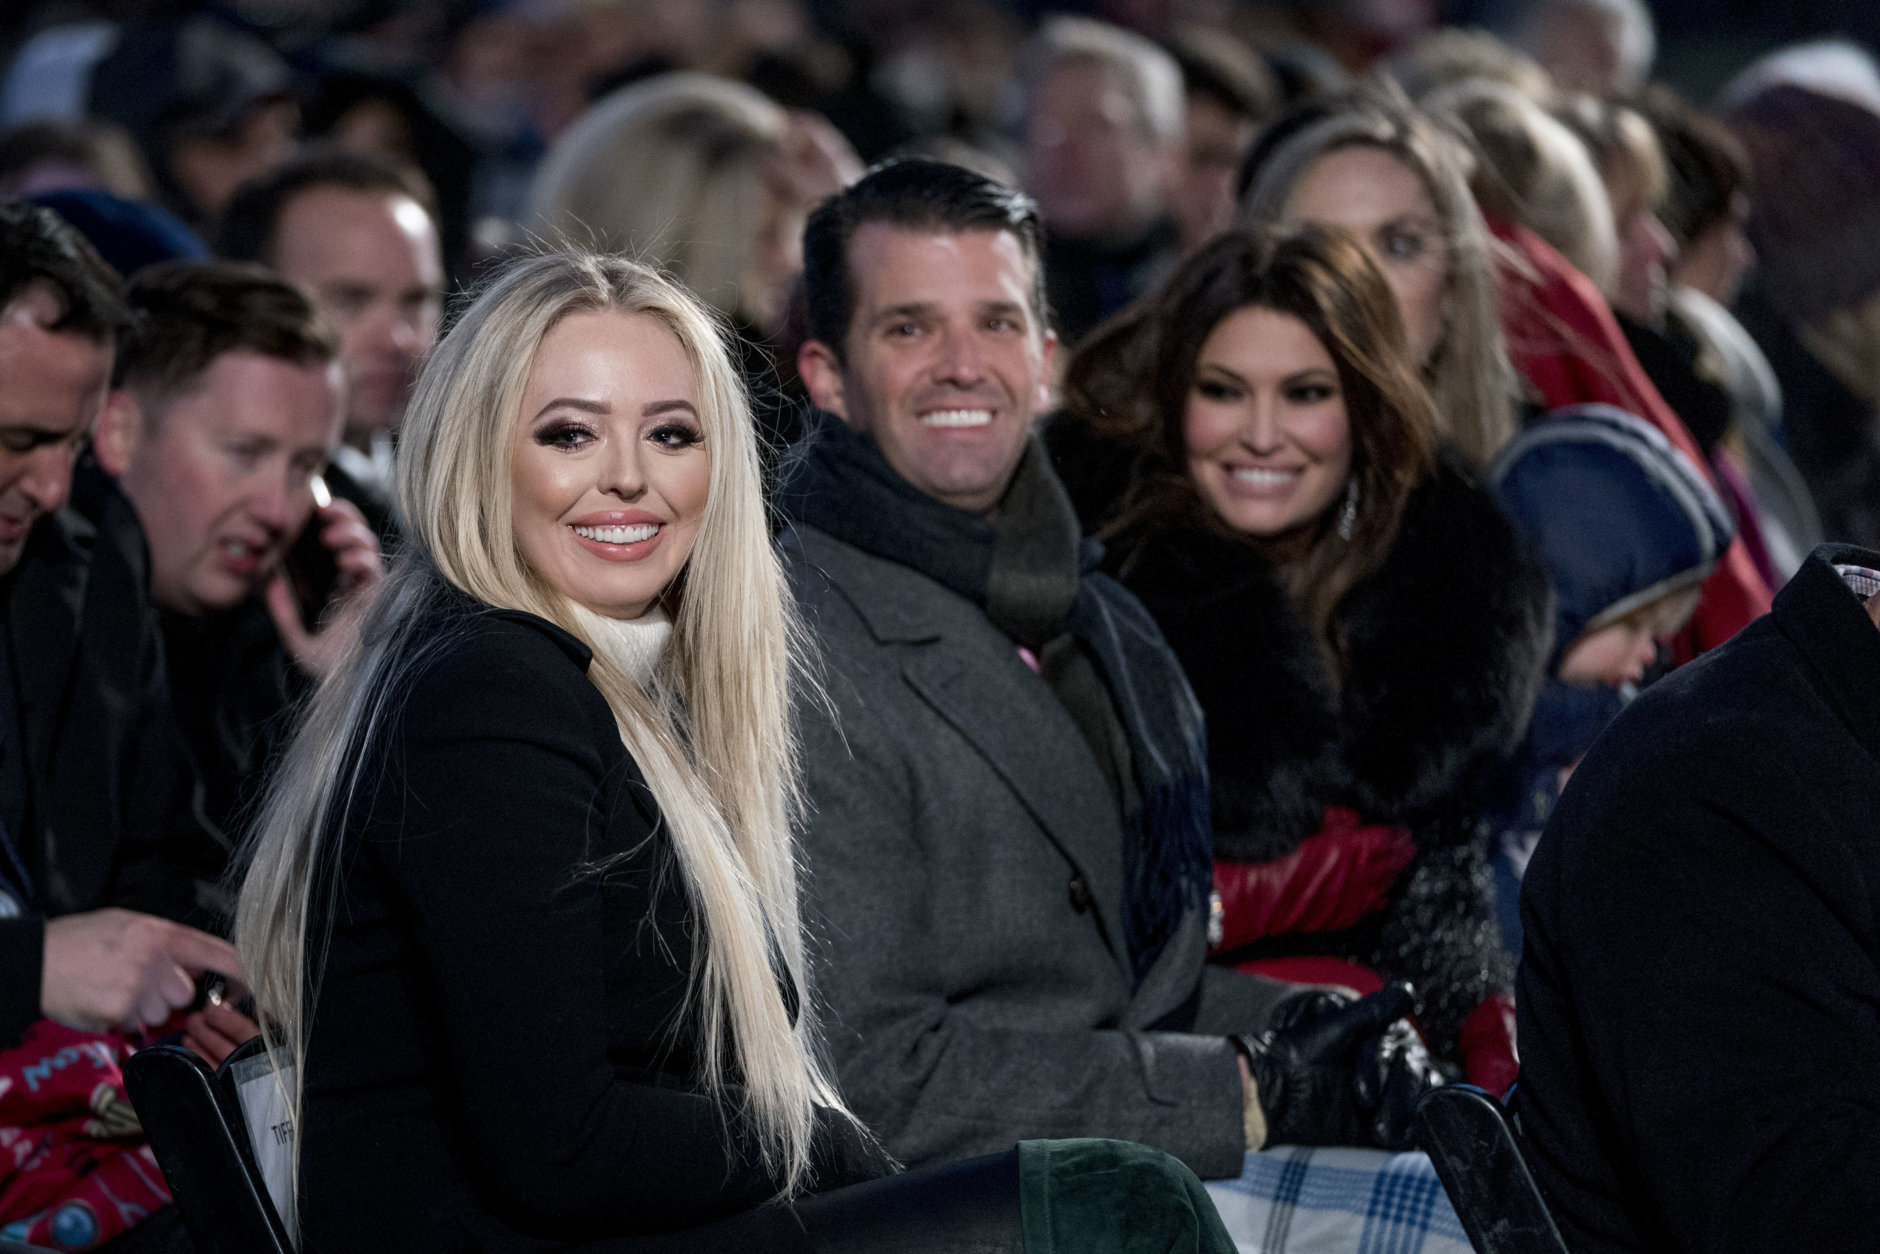 From left, Tiffany Trump, the daughter of President Donald Trump, Donald Trump Jr. and Kimberly Guilfoyle, arrive ahead of President Donald Trump and first lady Melania Trump at the National Christmas Tree lighting ceremony at the Ellipse near the White House in Washington, Wednesday, Nov. 28, 2018. (AP Photo/Andrew Harnik)